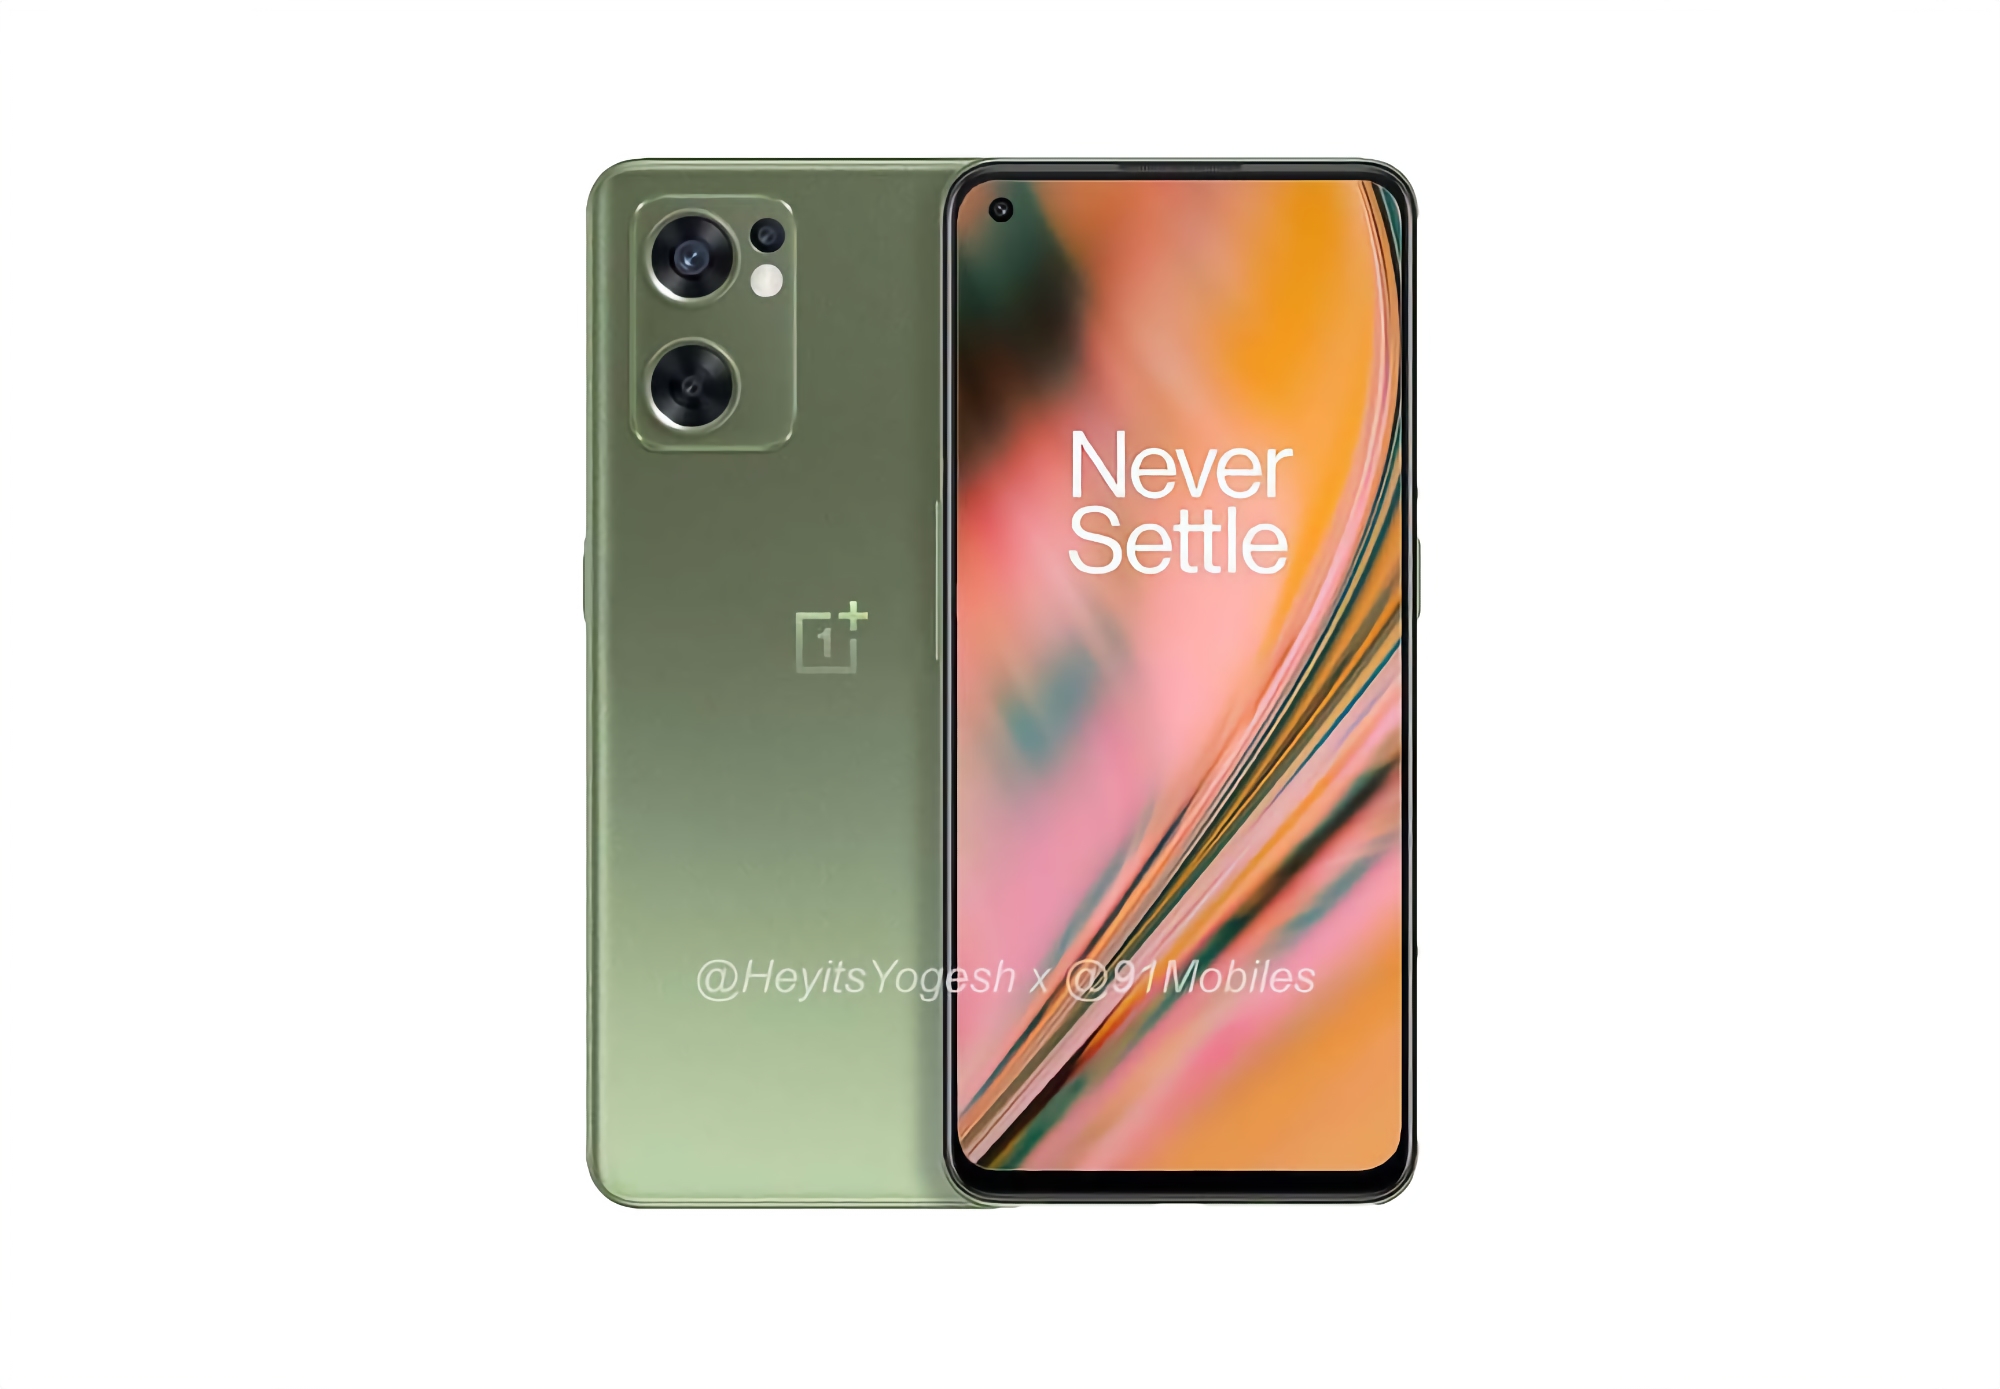 Insider: OnePlus Nord CE 2 5G with 90Hz AMOLED screen, Dimensity 900 chip and 65W charging will be presented on February 11